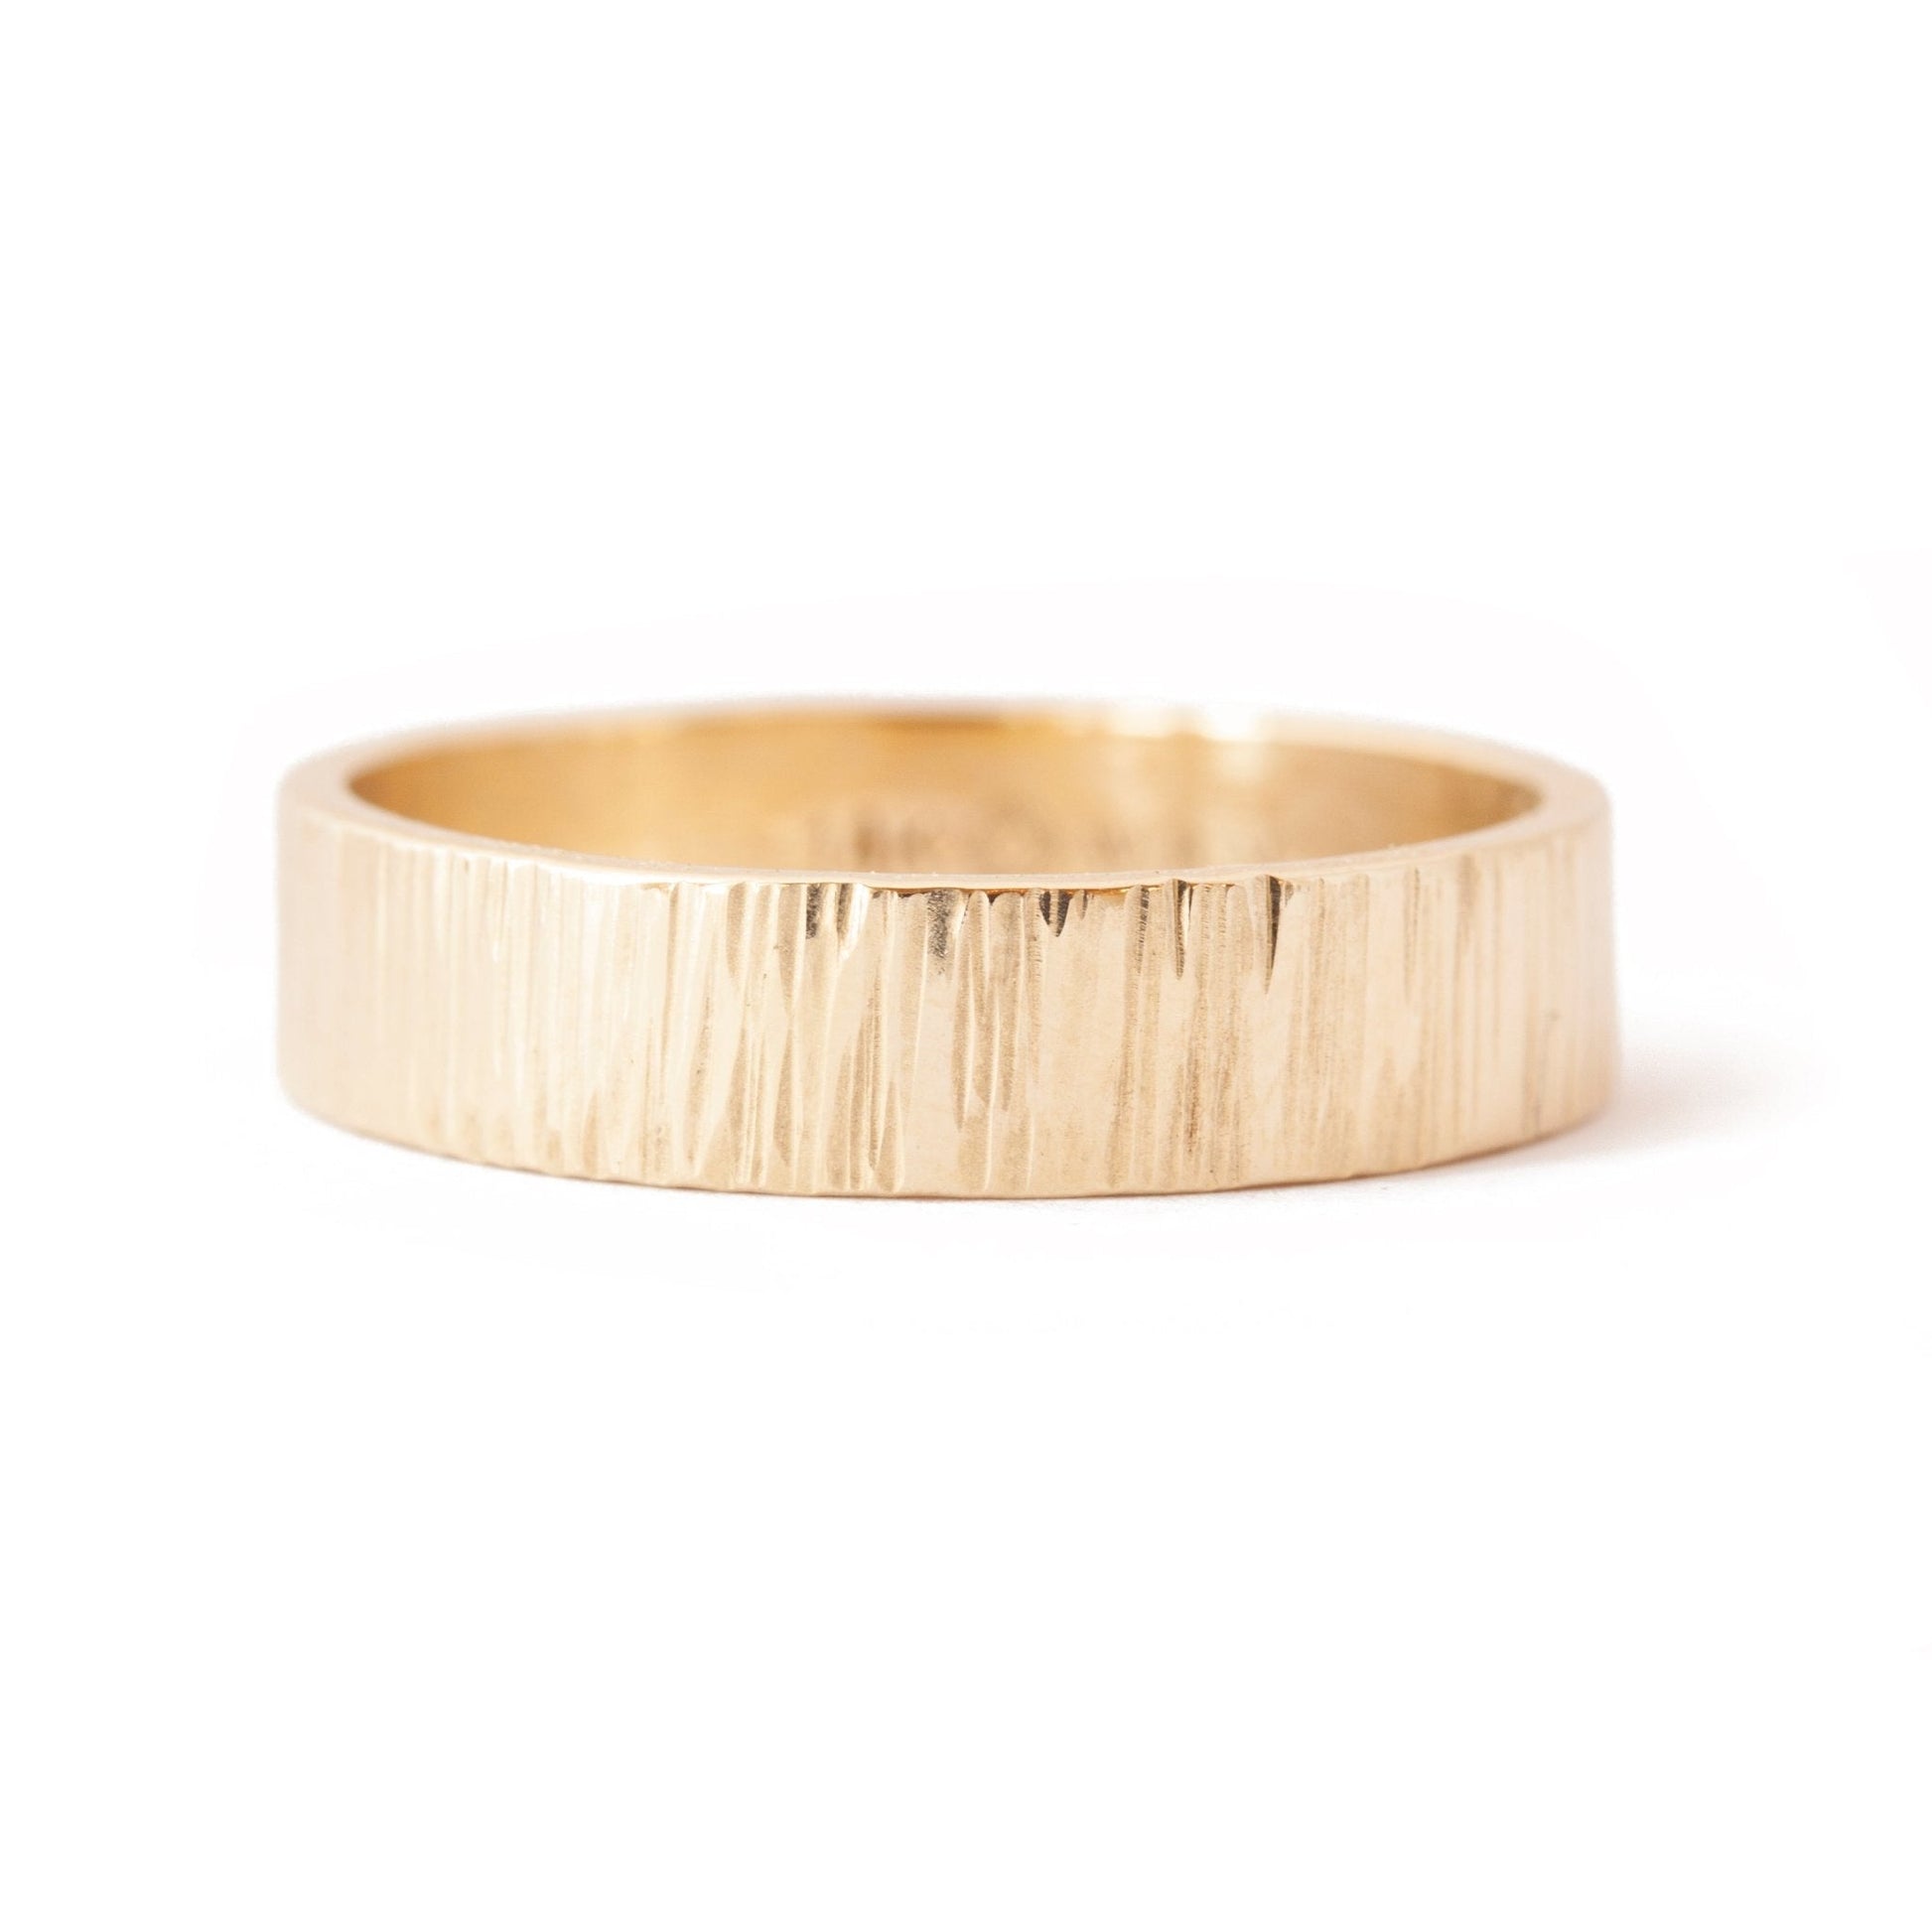 The Thatched Band (Ready to ship in 2mm width 14K yellow gold size 10.75) - W.R. Metalarts